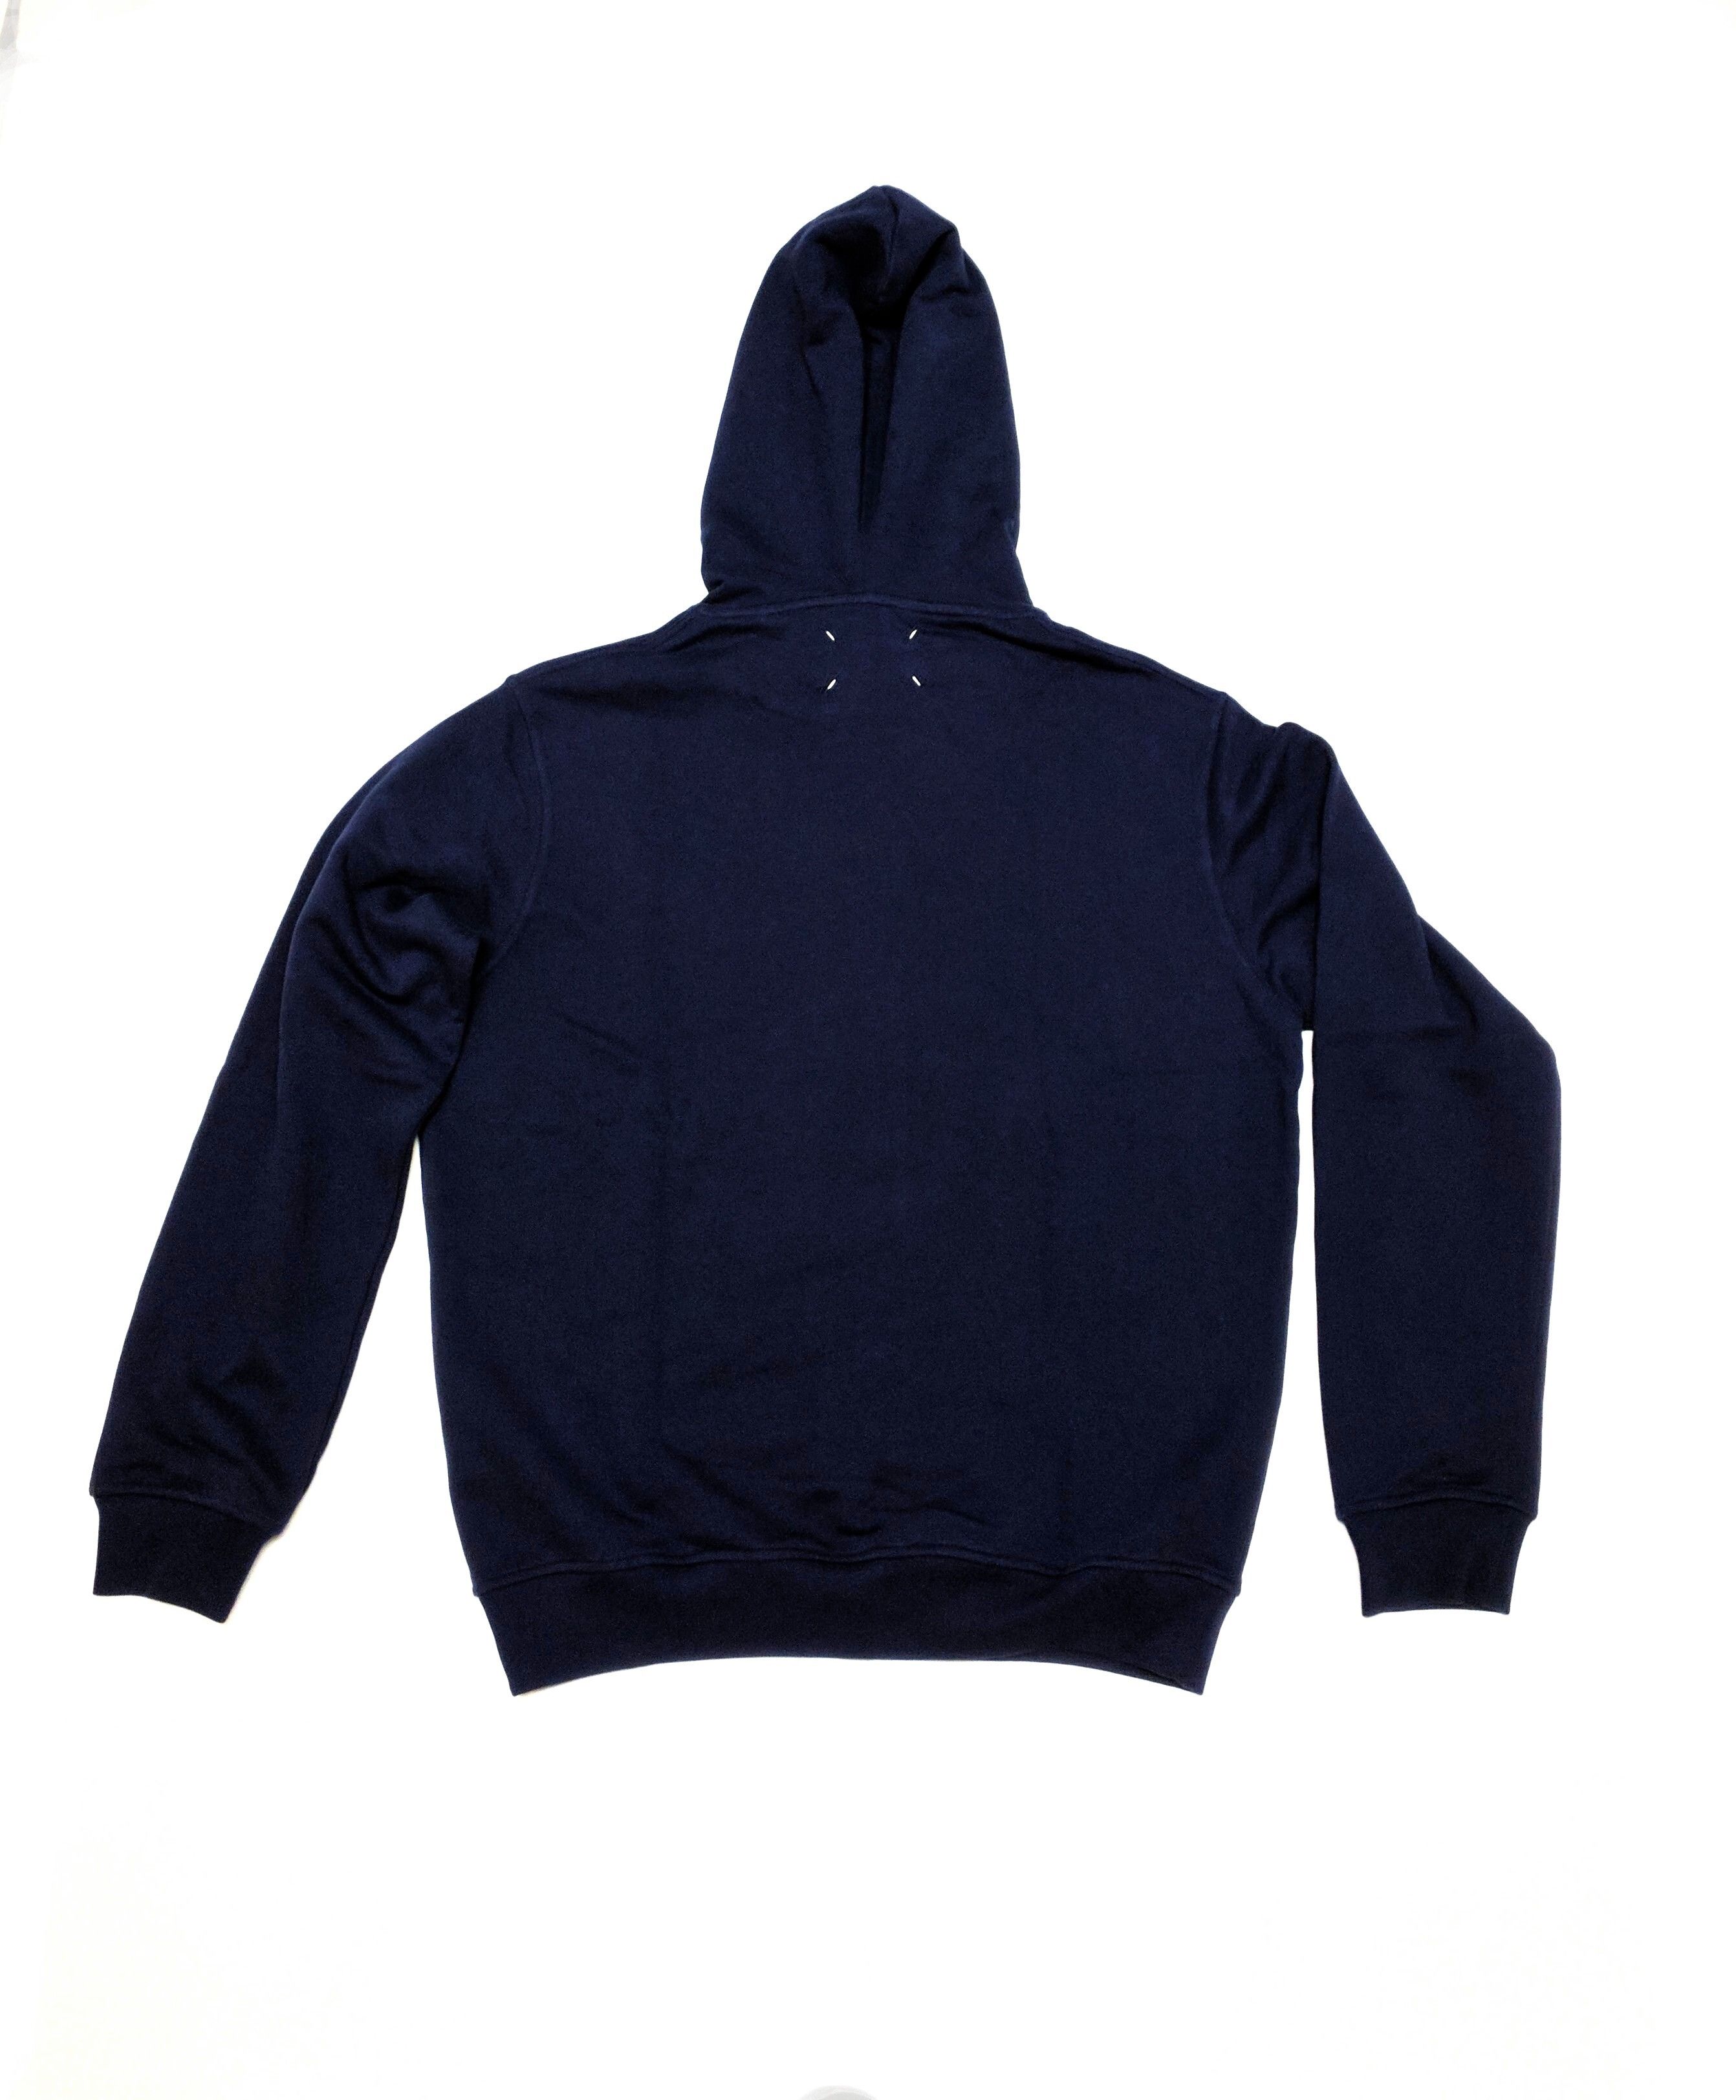 Maison Margiela Stereotype Hoodie Navy Blue 48 MMM Pullover Size US L / EU 52-54 / 3 - 8 Thumbnail